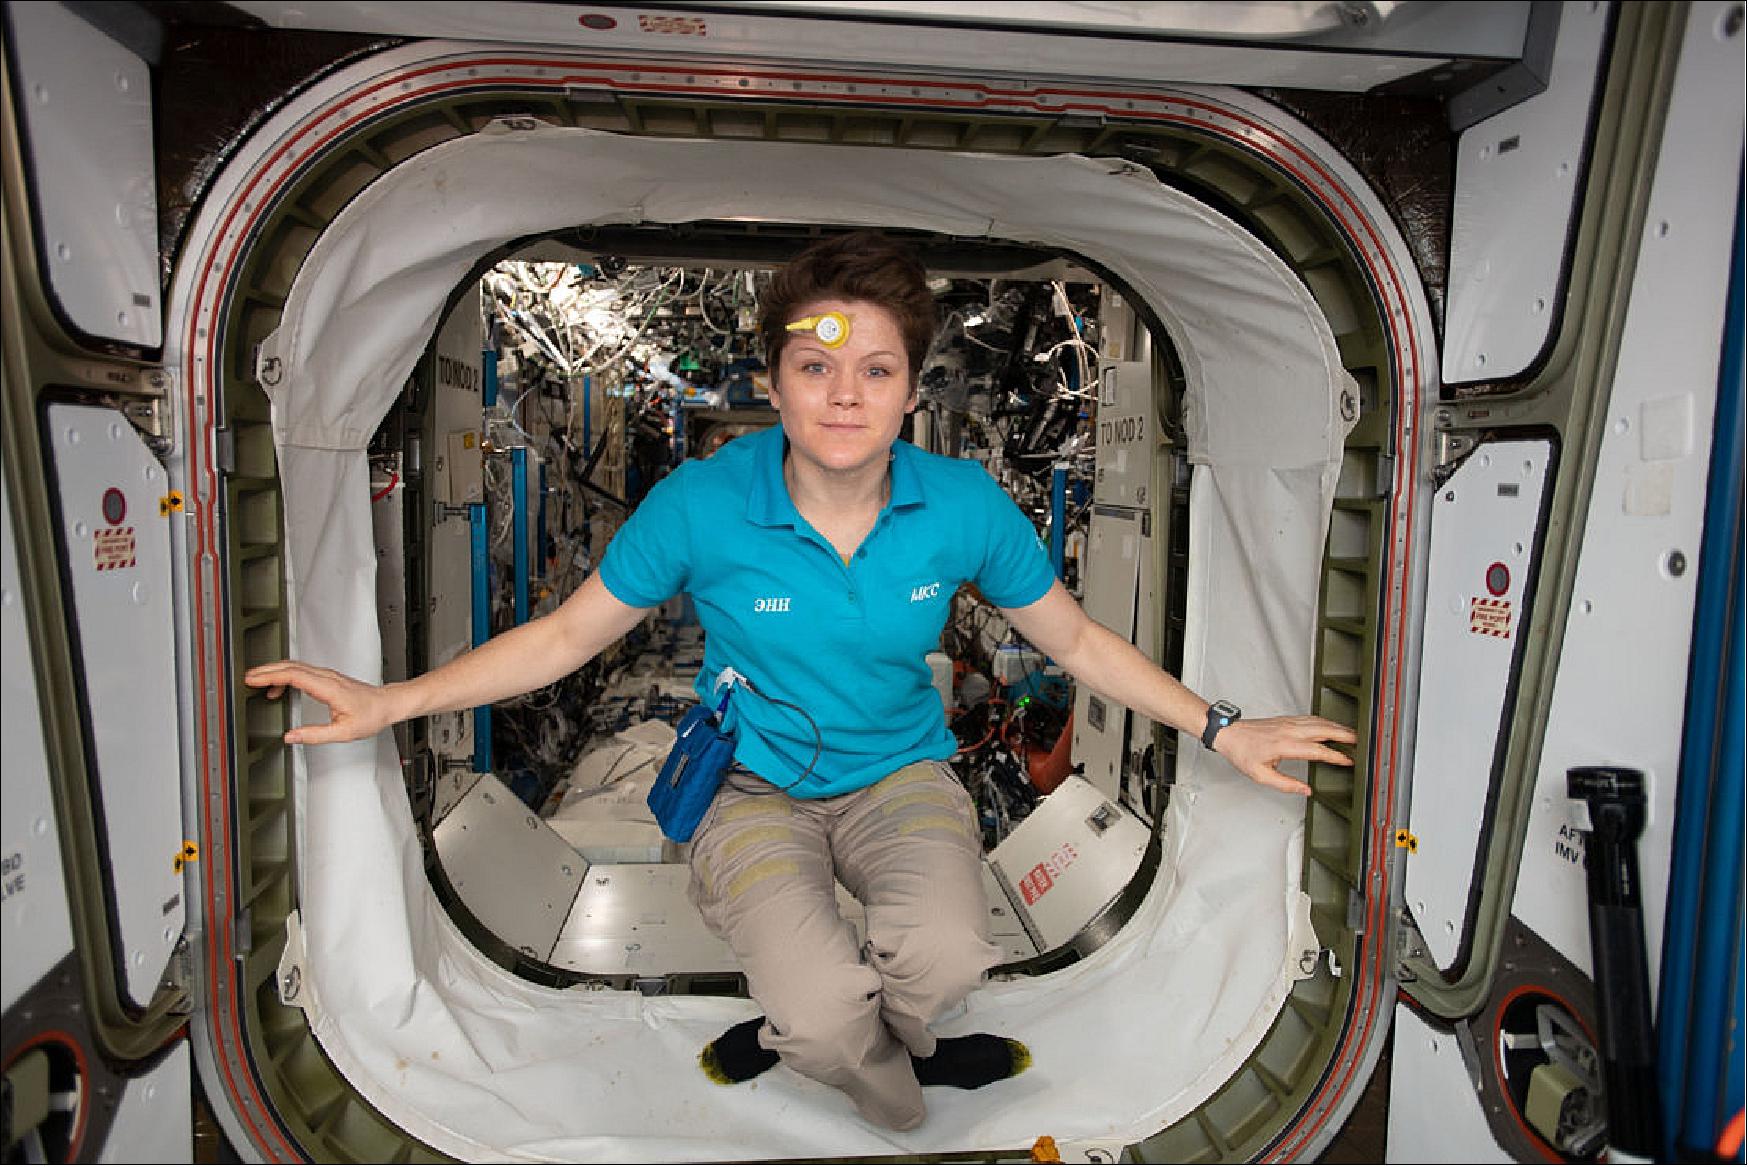 Figure 118: NASA astronaut and Expedition 58 flight engineer Anne McClain pictured inside the vestibule between the Harmony module and the Destiny laboratory module. She is wearing a sensor on her forehead that is collecting data for the Circadian Rhythms experiment researching how an astronaut's “biological clock” changes during long-duration spaceflight (image credit: NASA)